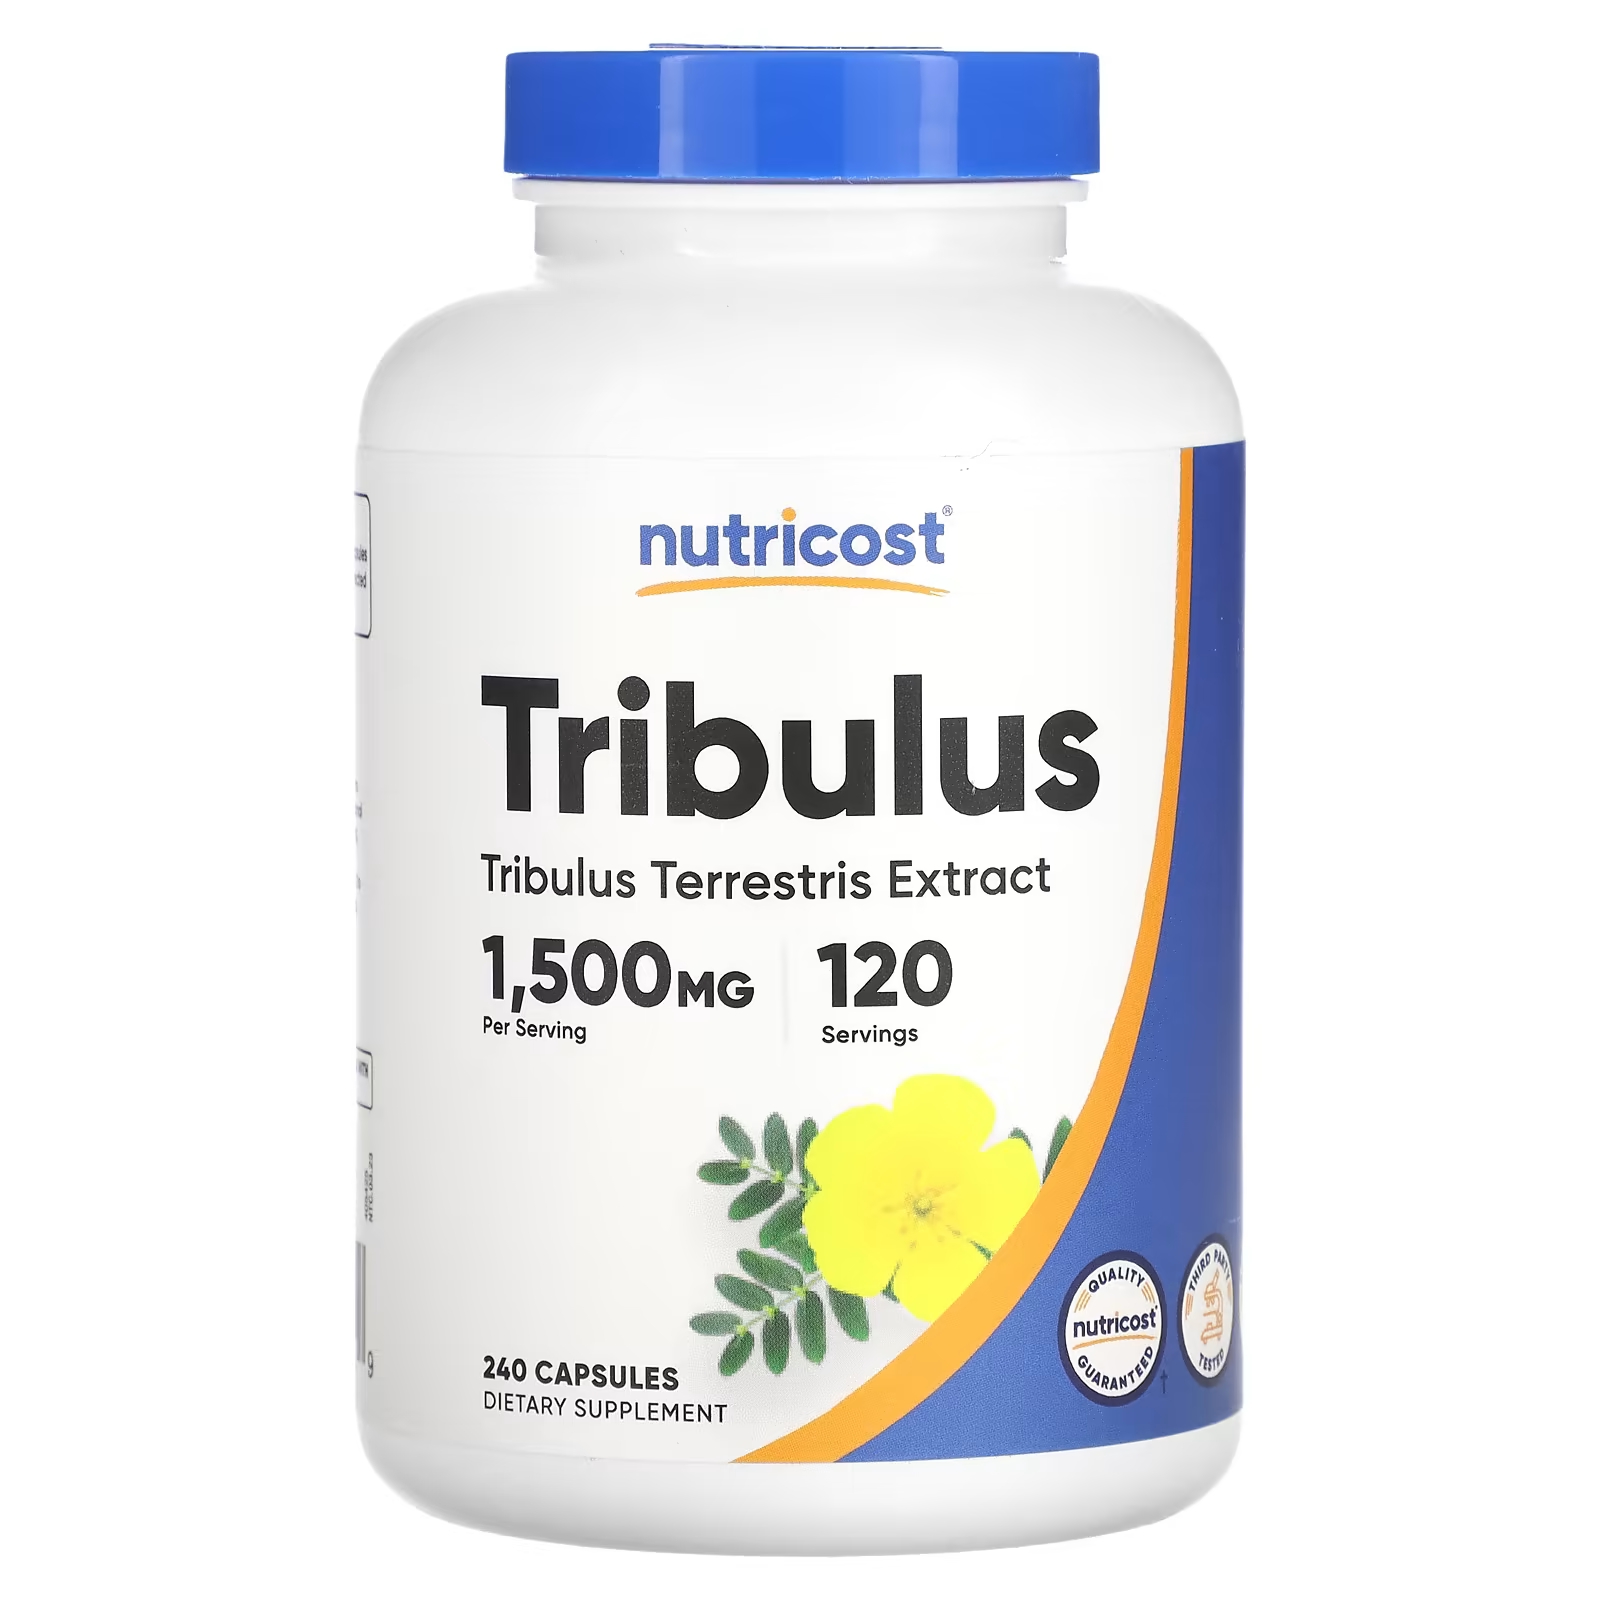 Nutricost Tribulus 1500 мг 240 капсул (750 мг на капсулу) evlution nutrition говяжья печень 3000 мг 120 капсул 750 мг на капсулу